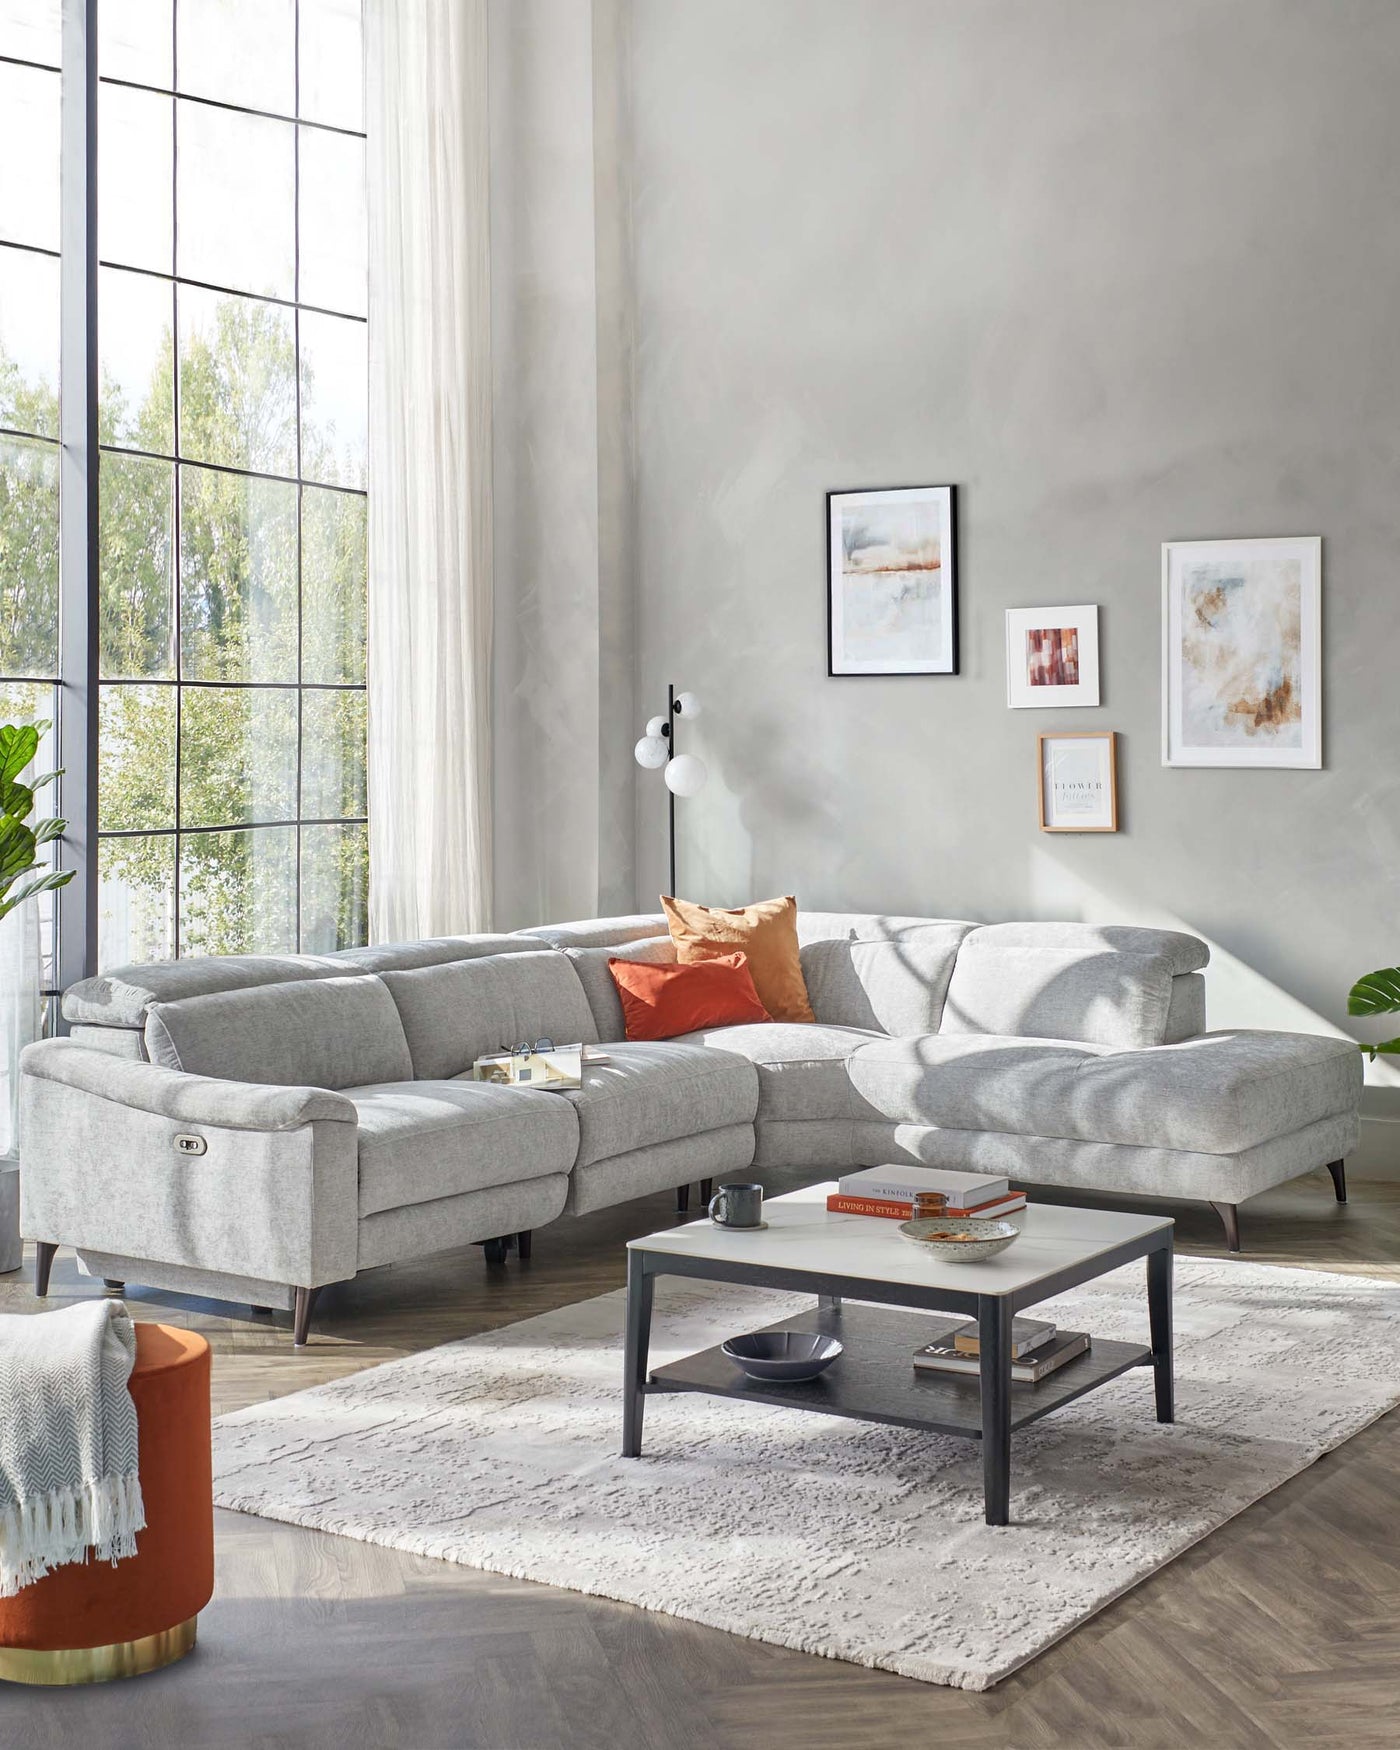 Modern light grey sectional sofa with chaise on silver metal legs, small round orange side table with golden base, rectangular black and grey coffee table with a lower shelf, and a white textured area rug.